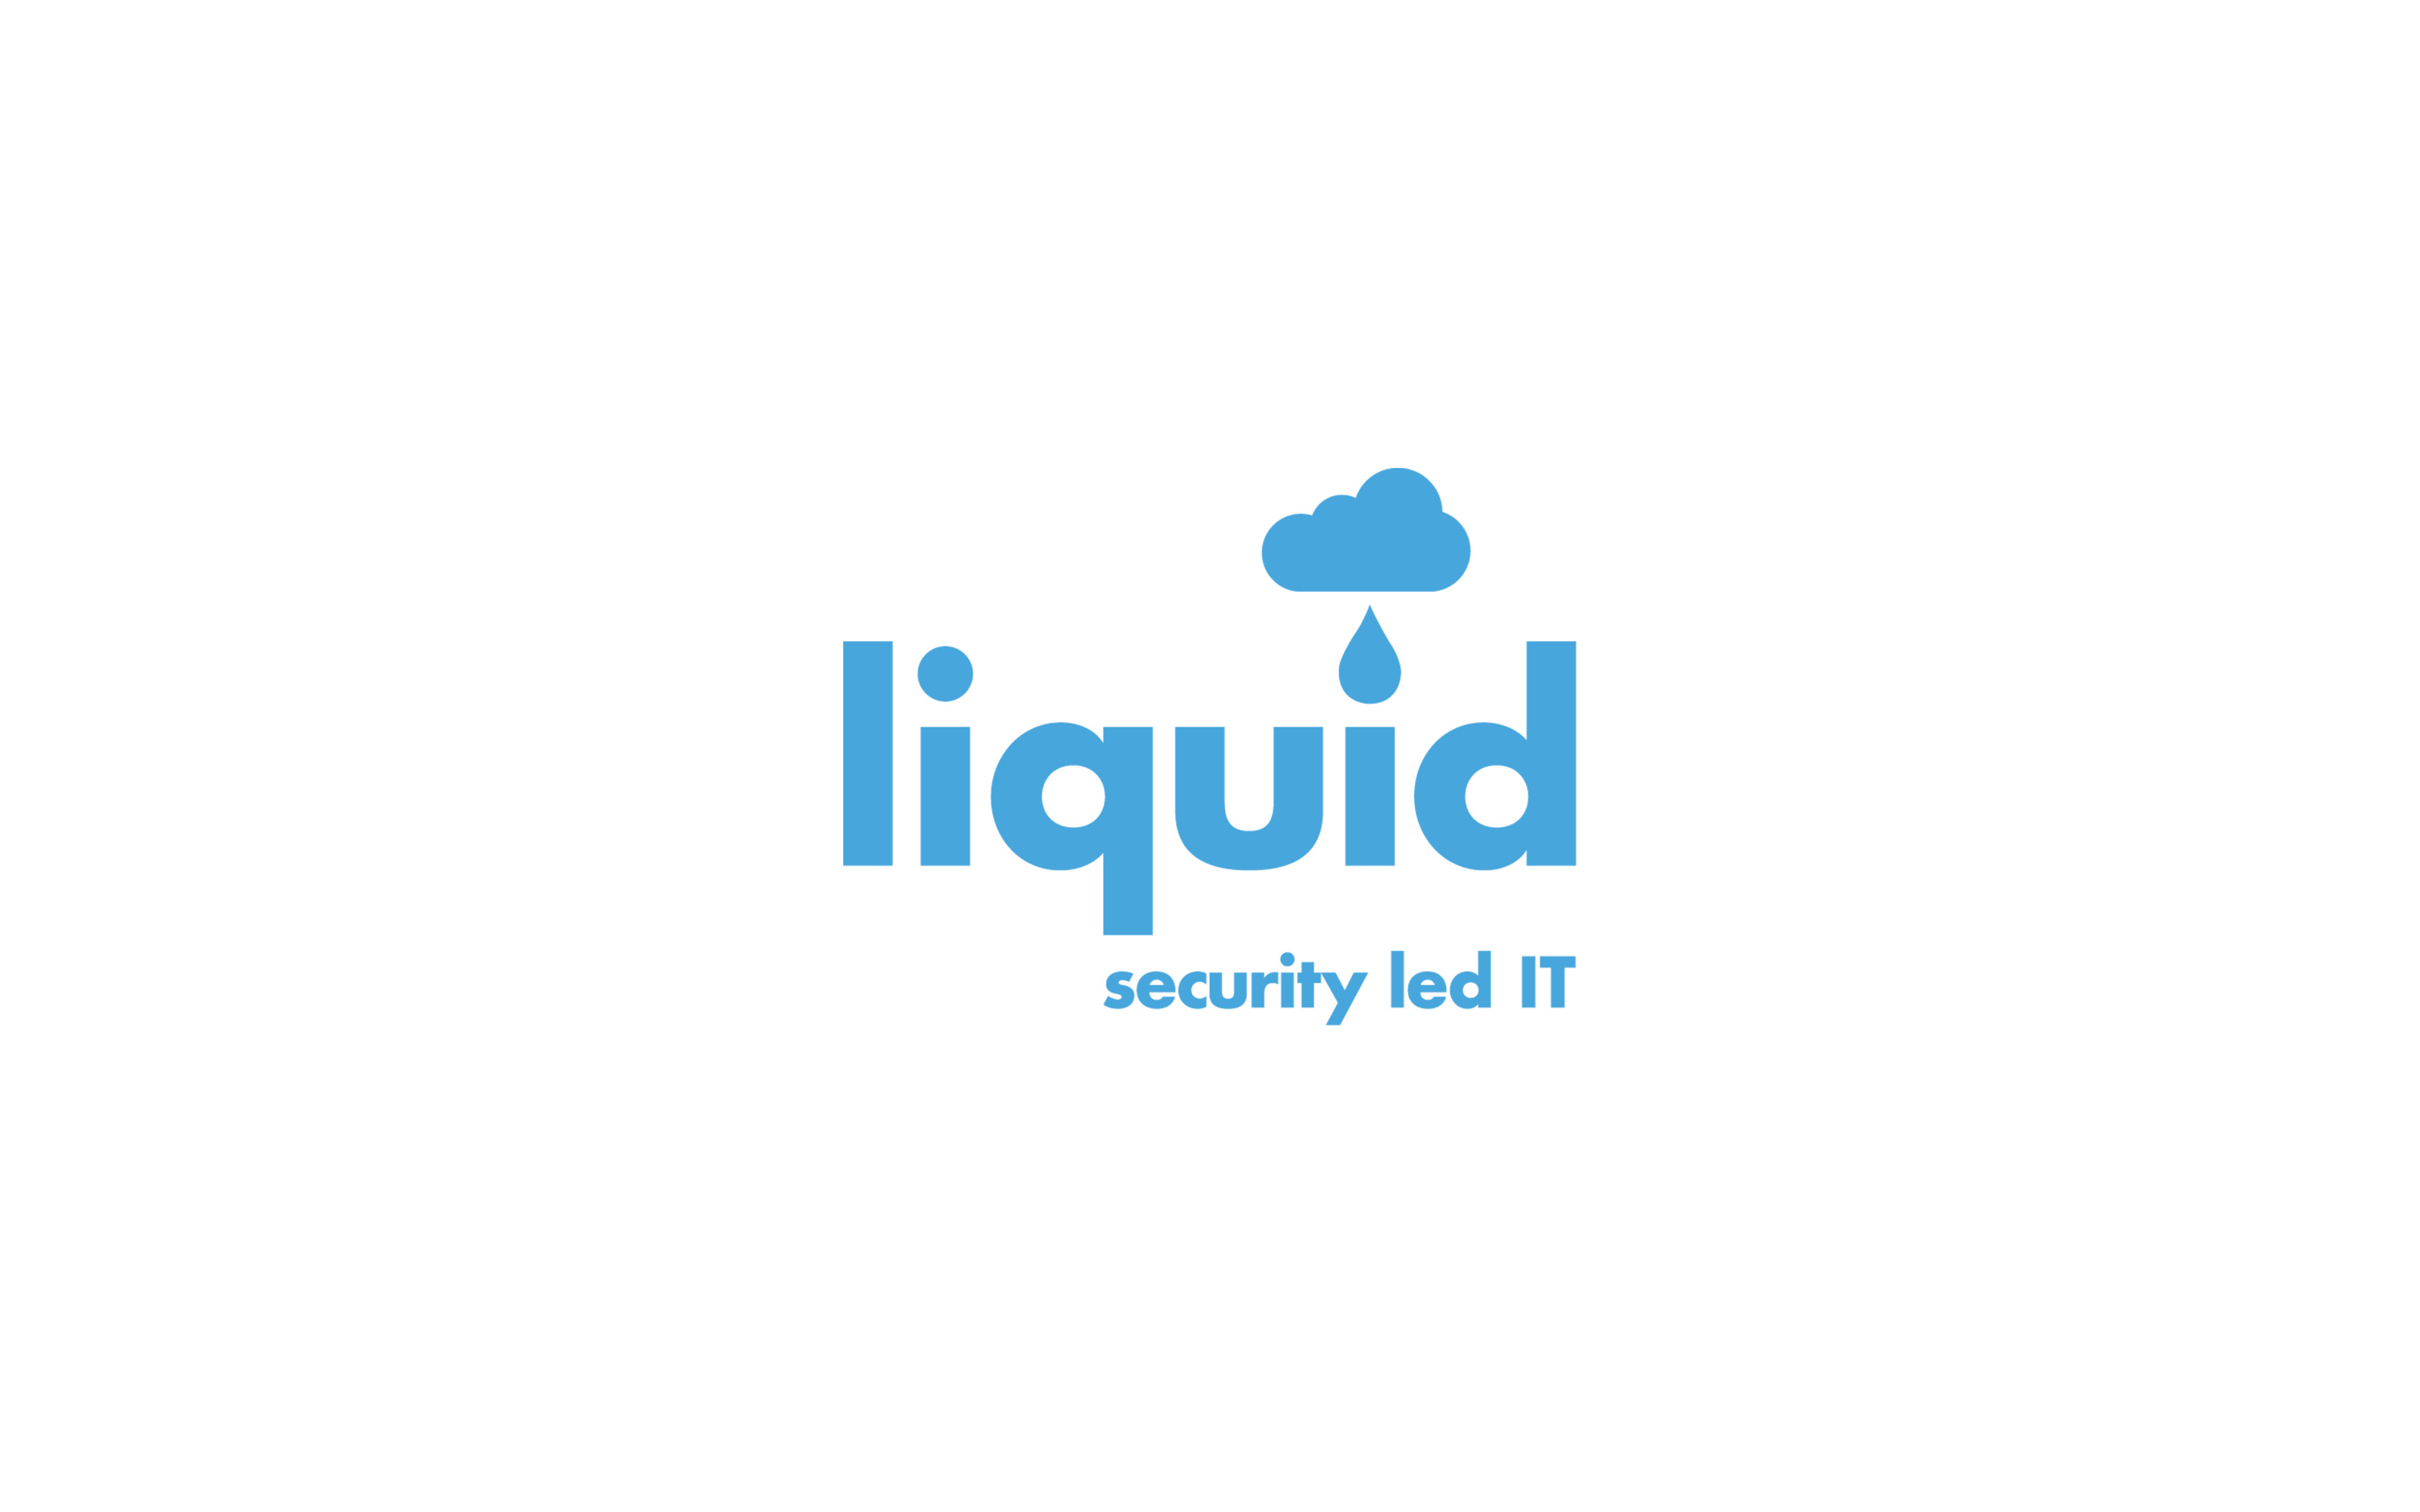 Branding that is fluid. A brand refresh for Liquid IT who are experiencing rapid growth as a new leader in IT services.